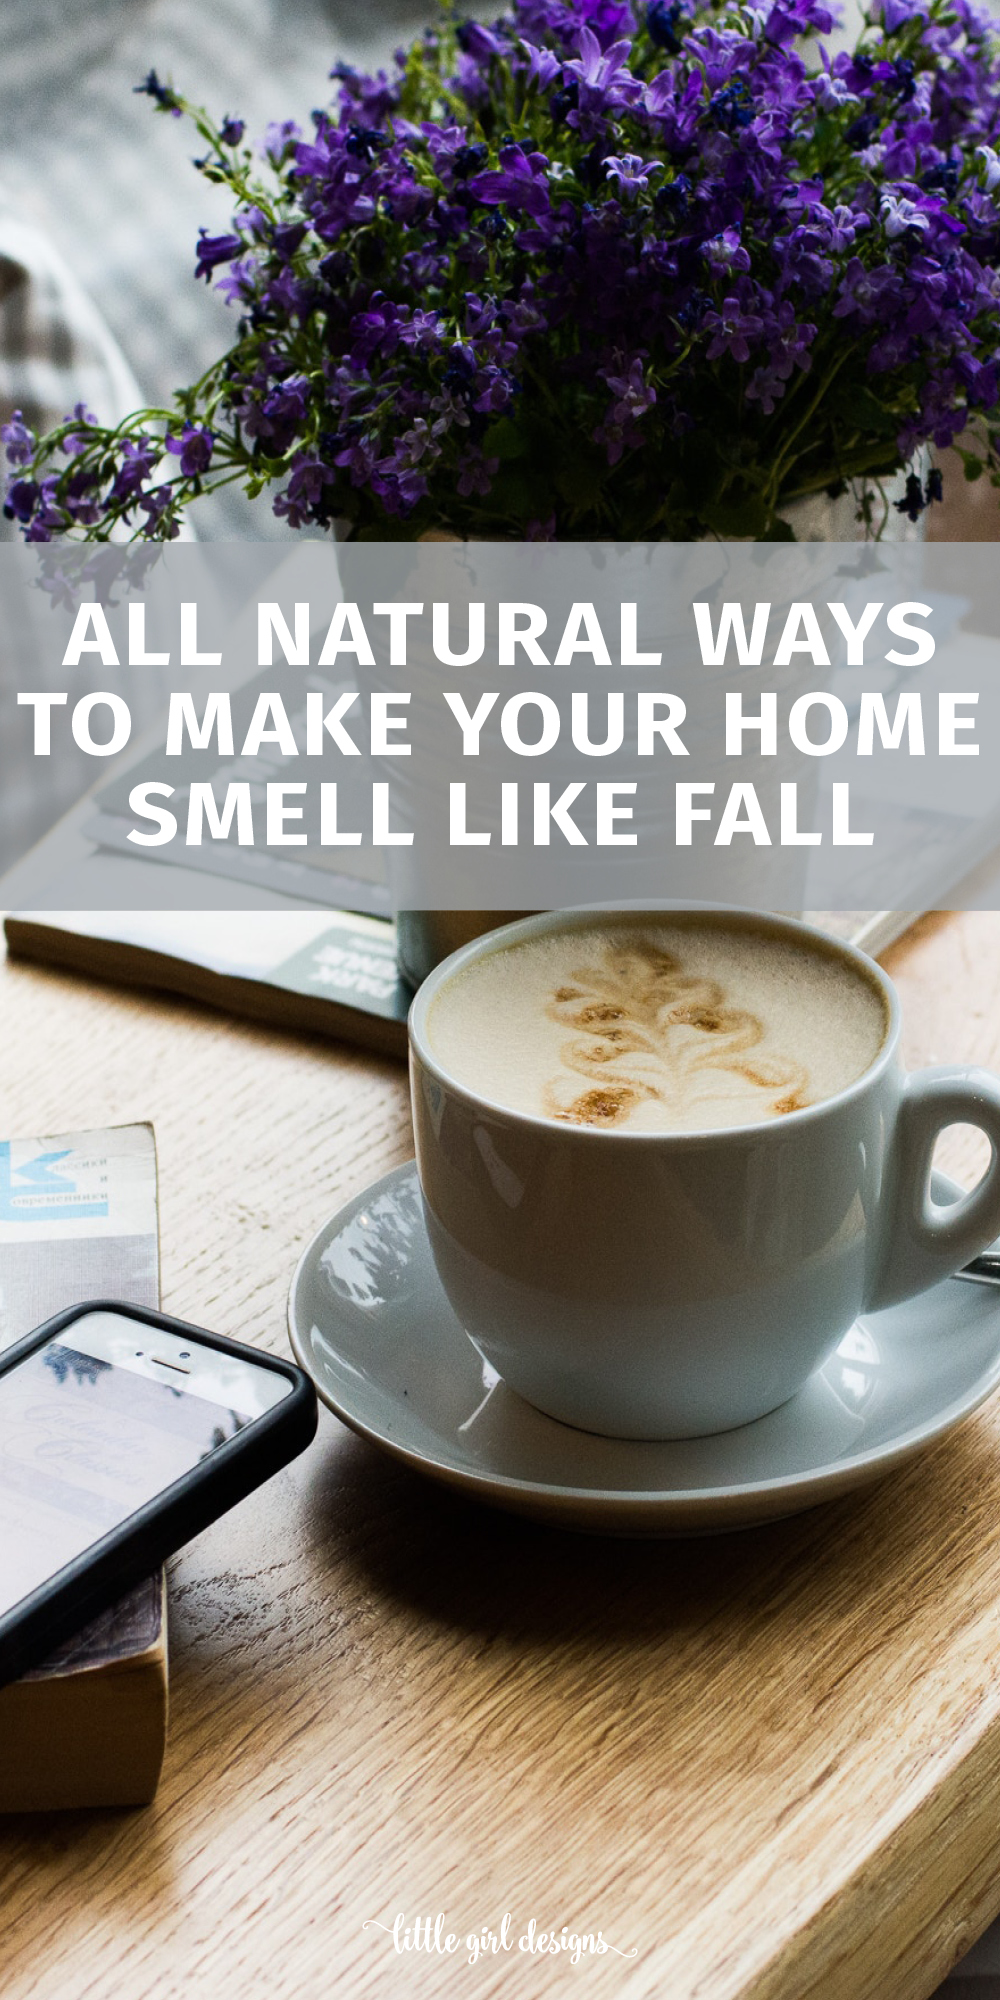 Fall is in the air! I love to find natural ways to make my home smell like fall and these recipes, DIYs, and simple tricks are perfect. I love how there are chemical free options for that yummy fall scent!